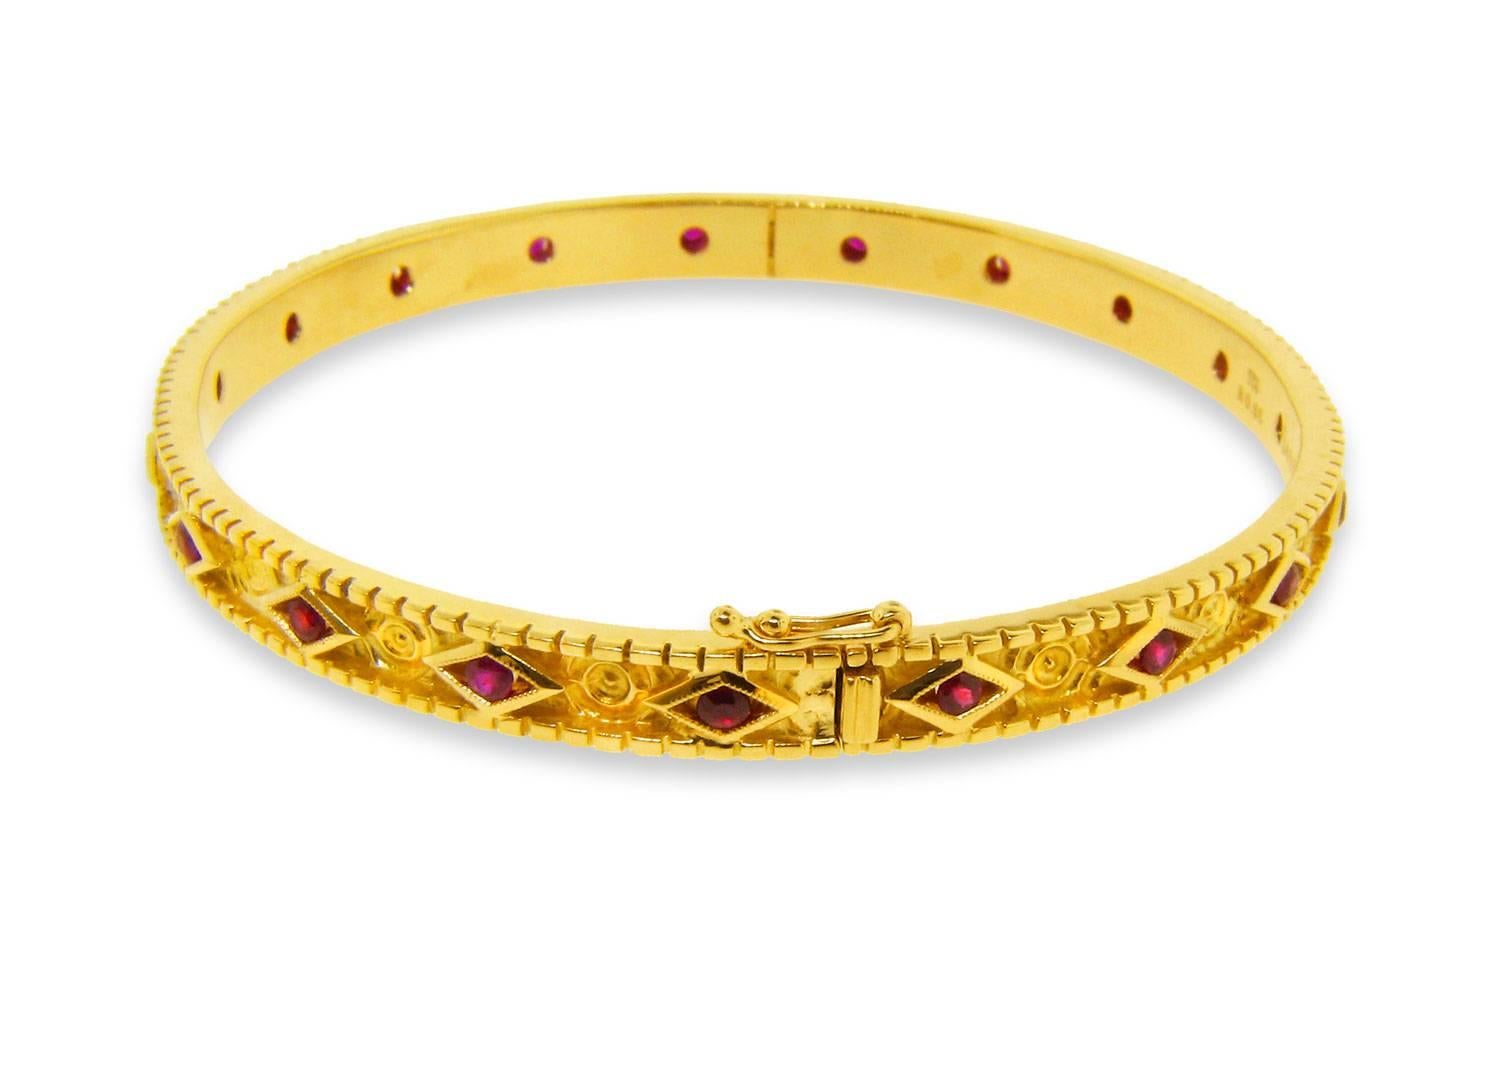 What a perfectly versatile bracelet by Santa Fe based designer Danuta. This 18 karat yellow gold bangle can be worn casually while shopping around town, or can be dressed up and compliment a little black dress. 

0.95 Total weight of stunning rubies